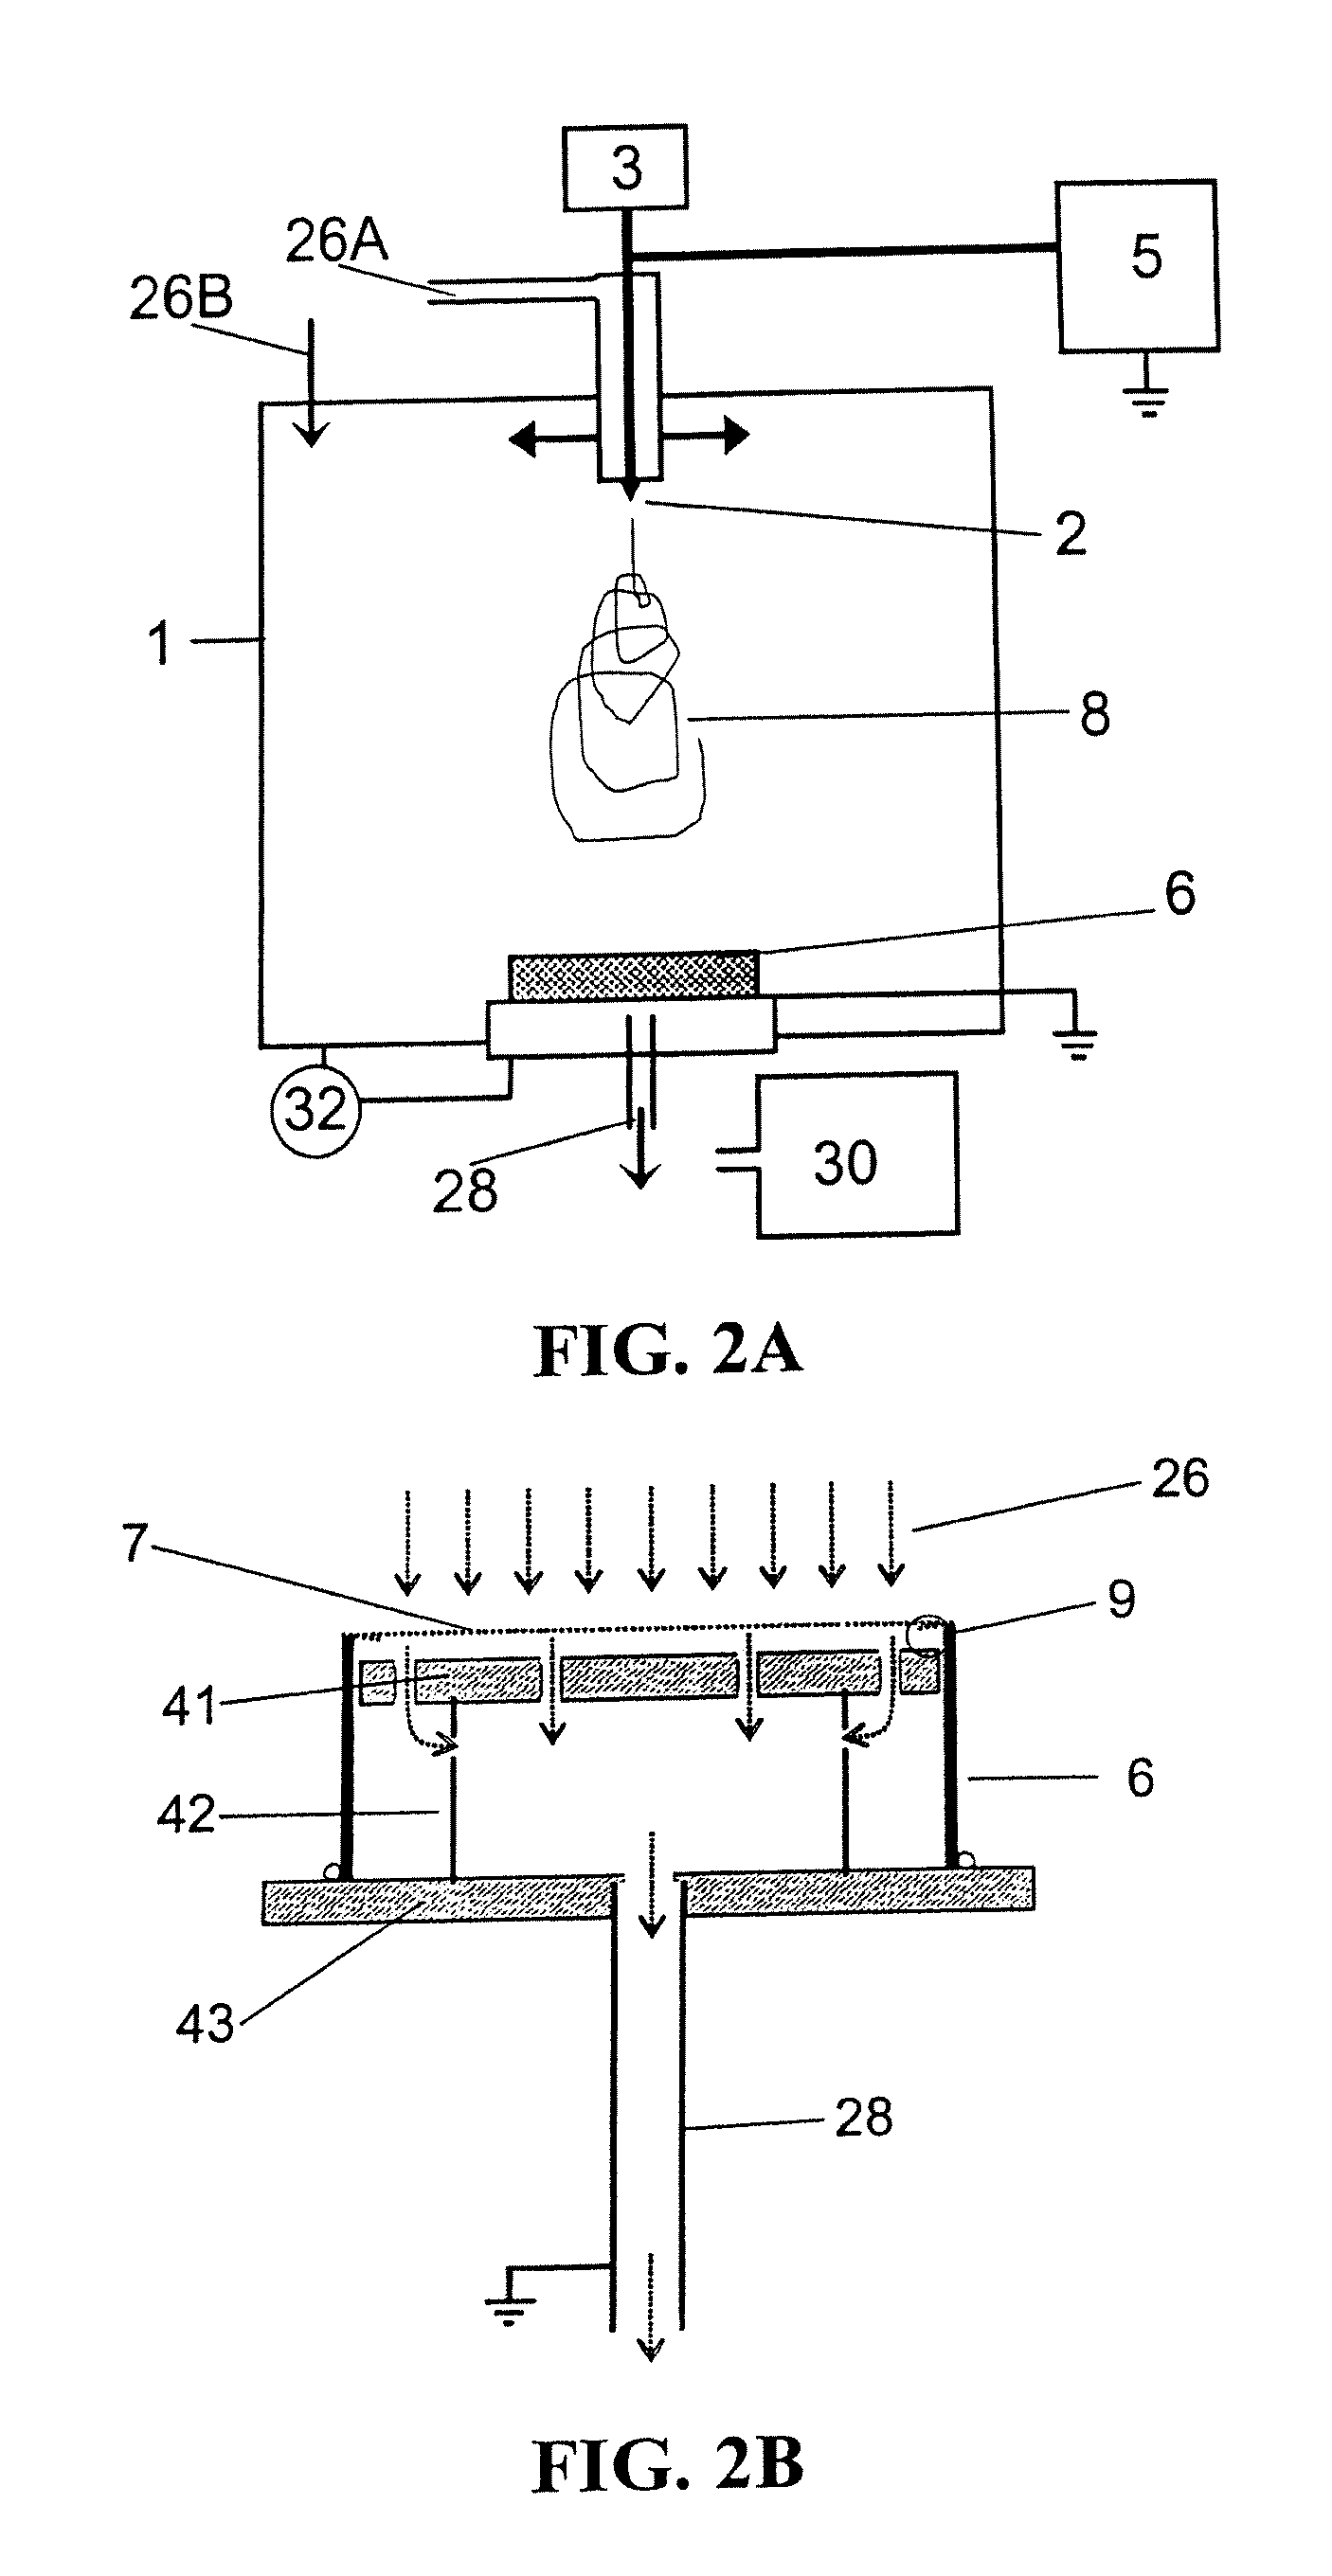 Particle filter system incorporating nanofibers